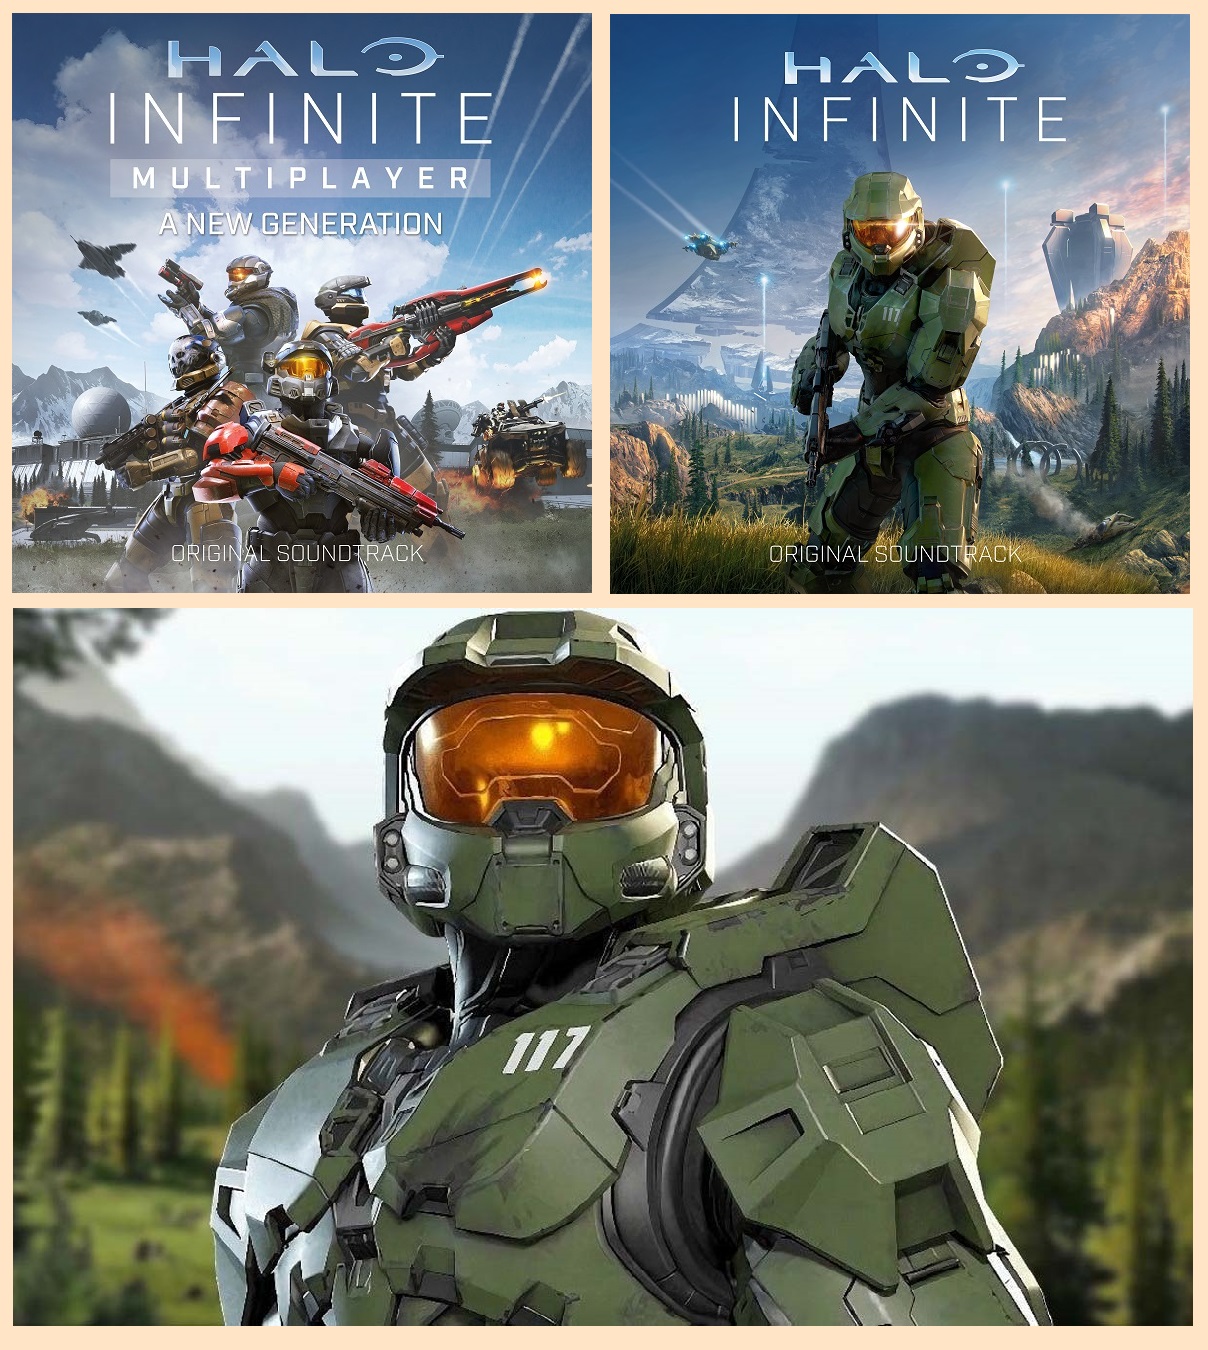 Halo Infinite and Halo Infinite Multiplayer: A New Generation